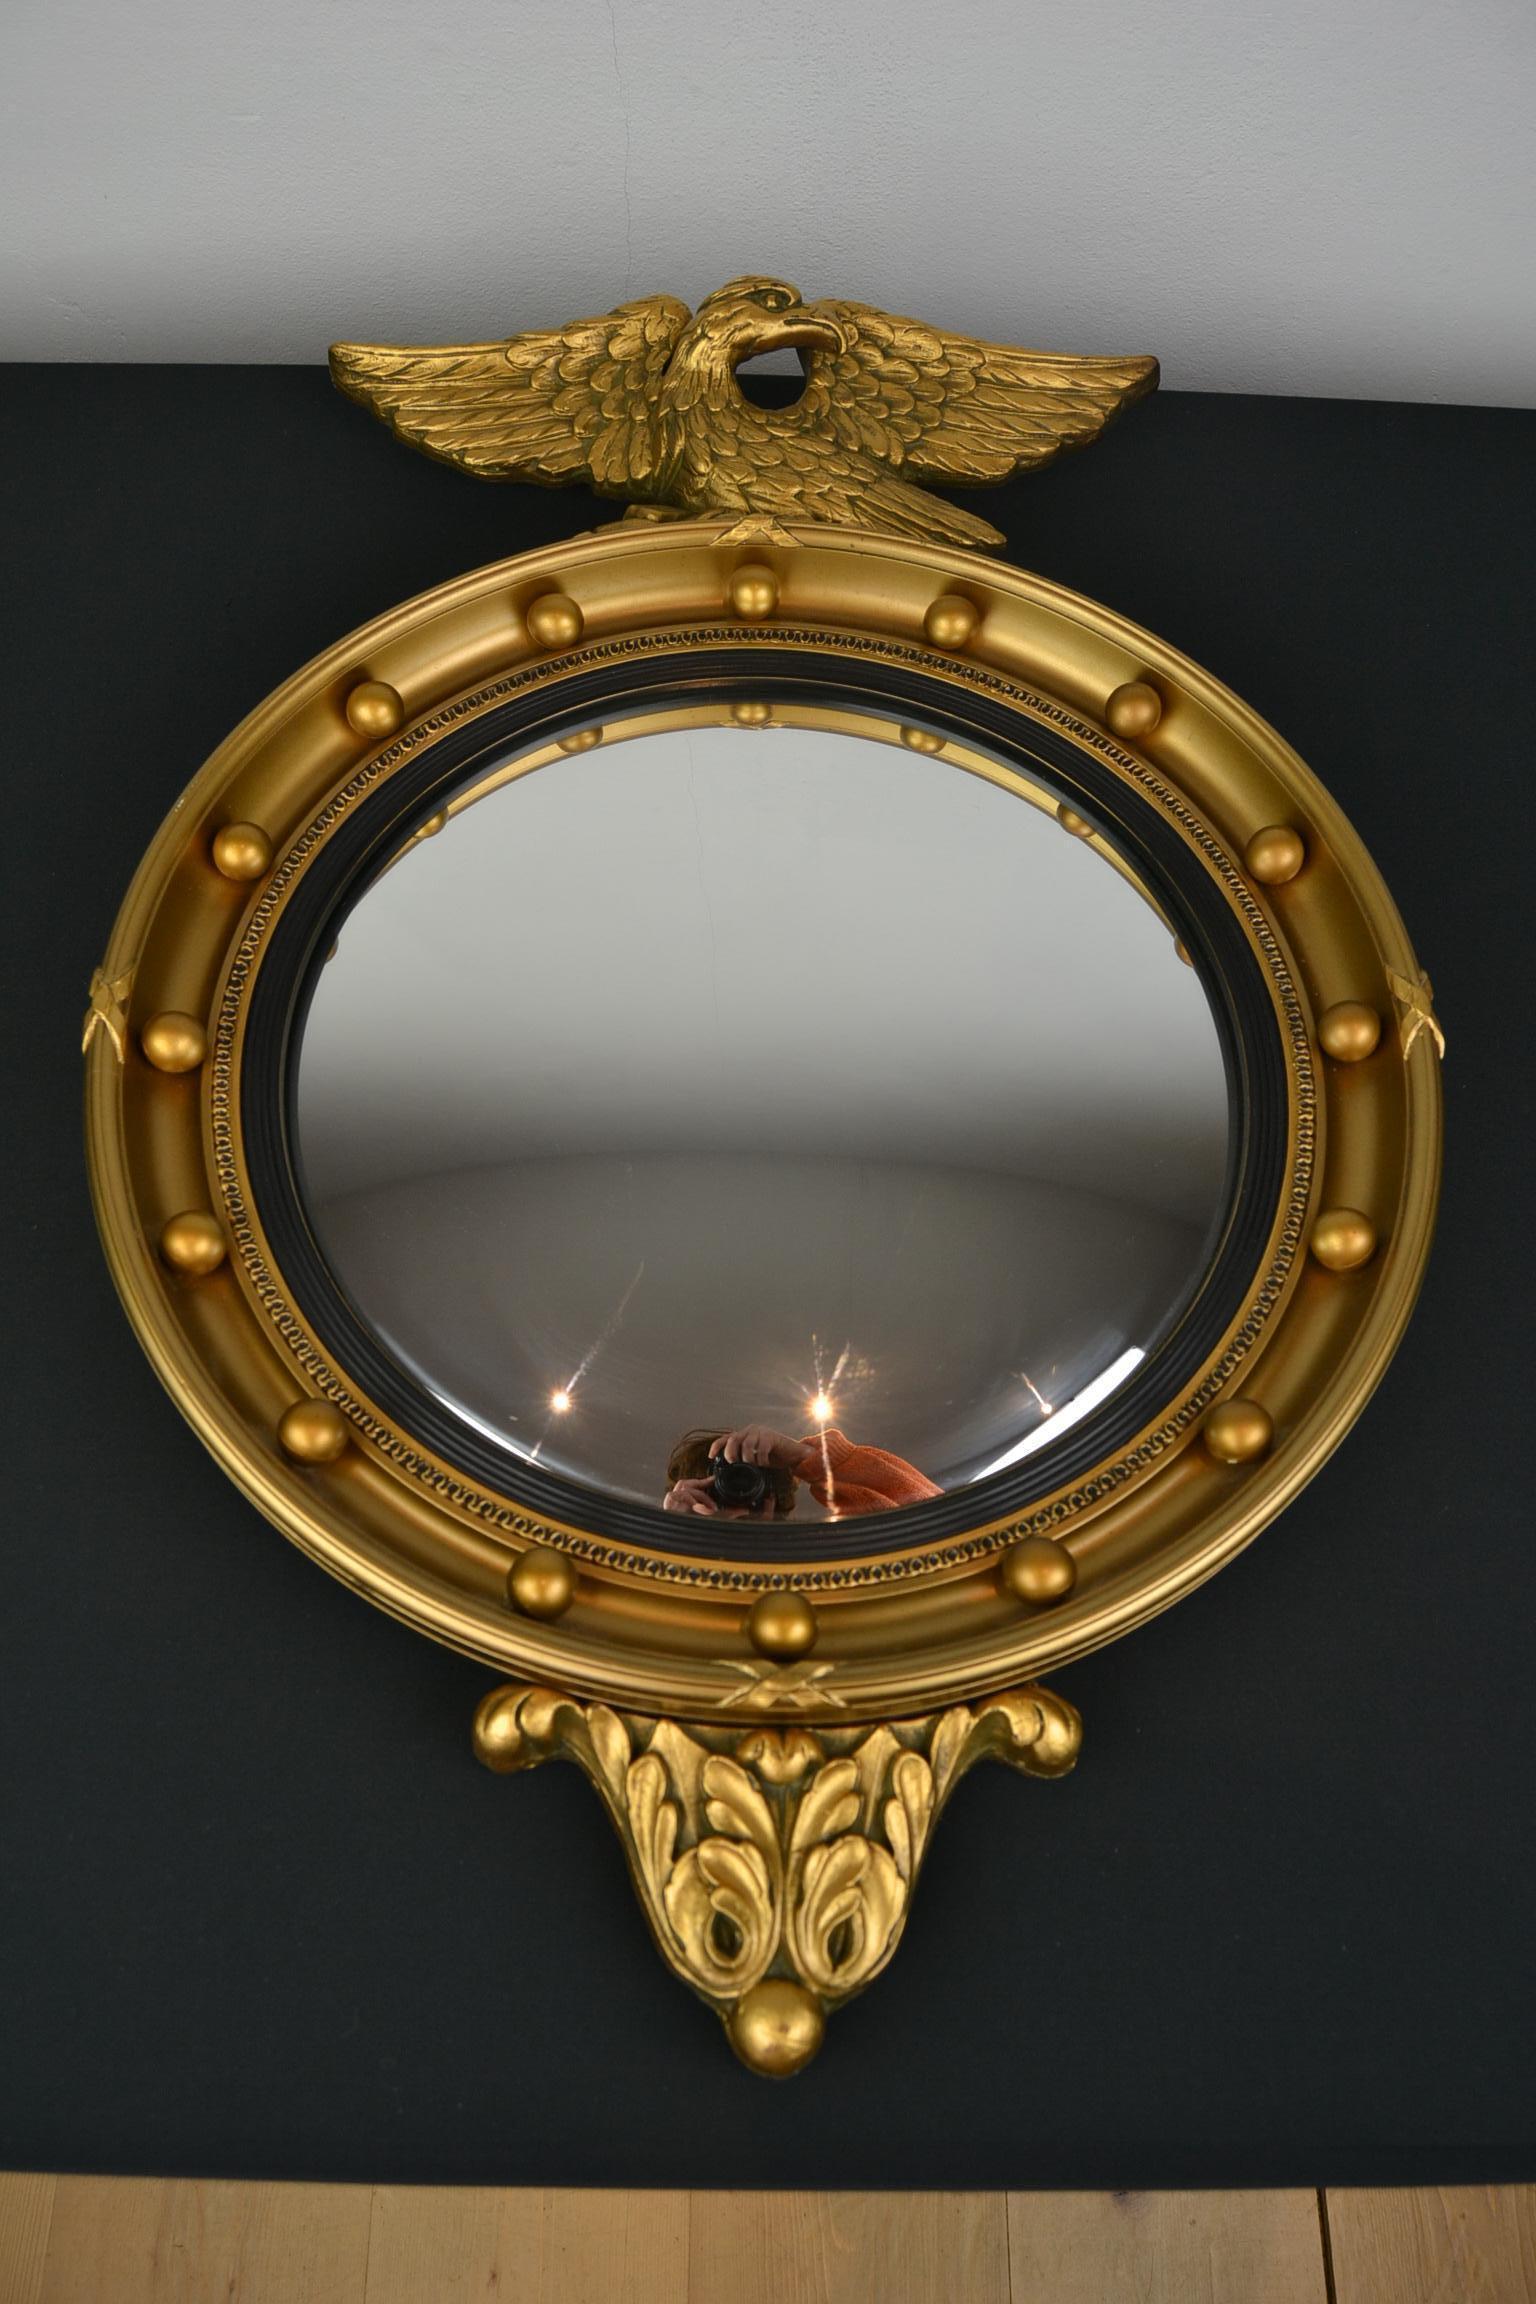 English Bullseye Mirror - Eagle Convex Mirror - Porthole Mirror with an Eagle on top.
This Gilt Resin Mirror, circular mirror has style and will suit your interior well.
Vintage gilt mirror made by Atsonea England in the 1960s.
Regency - Hollywood